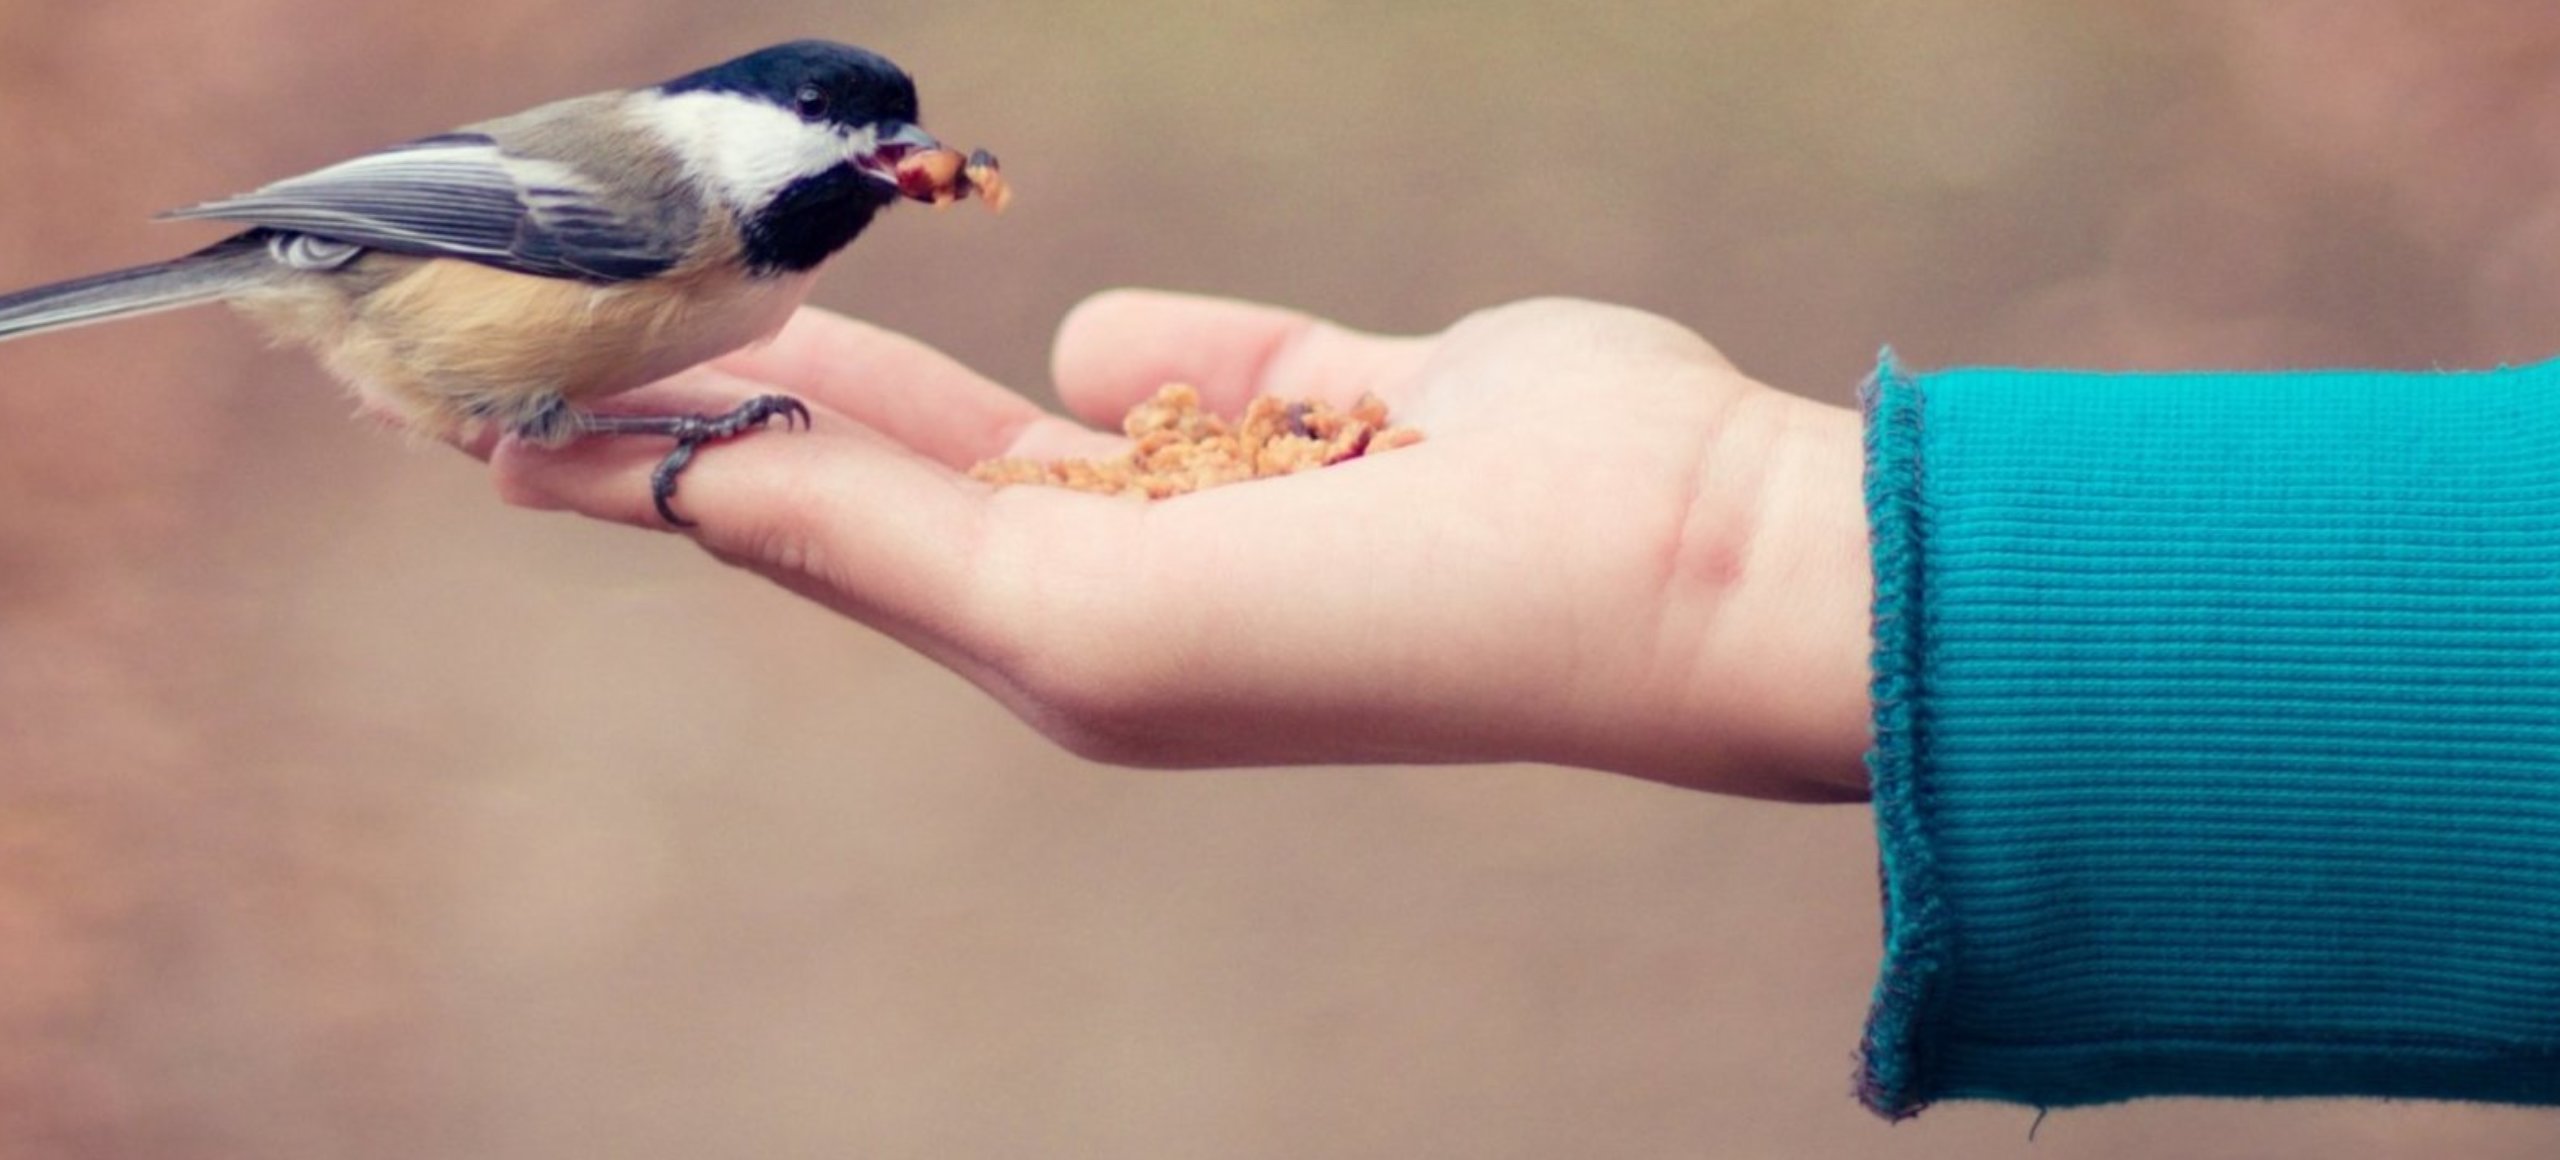 A small chickadee bird perches in someone's hand, eating food from their palm.